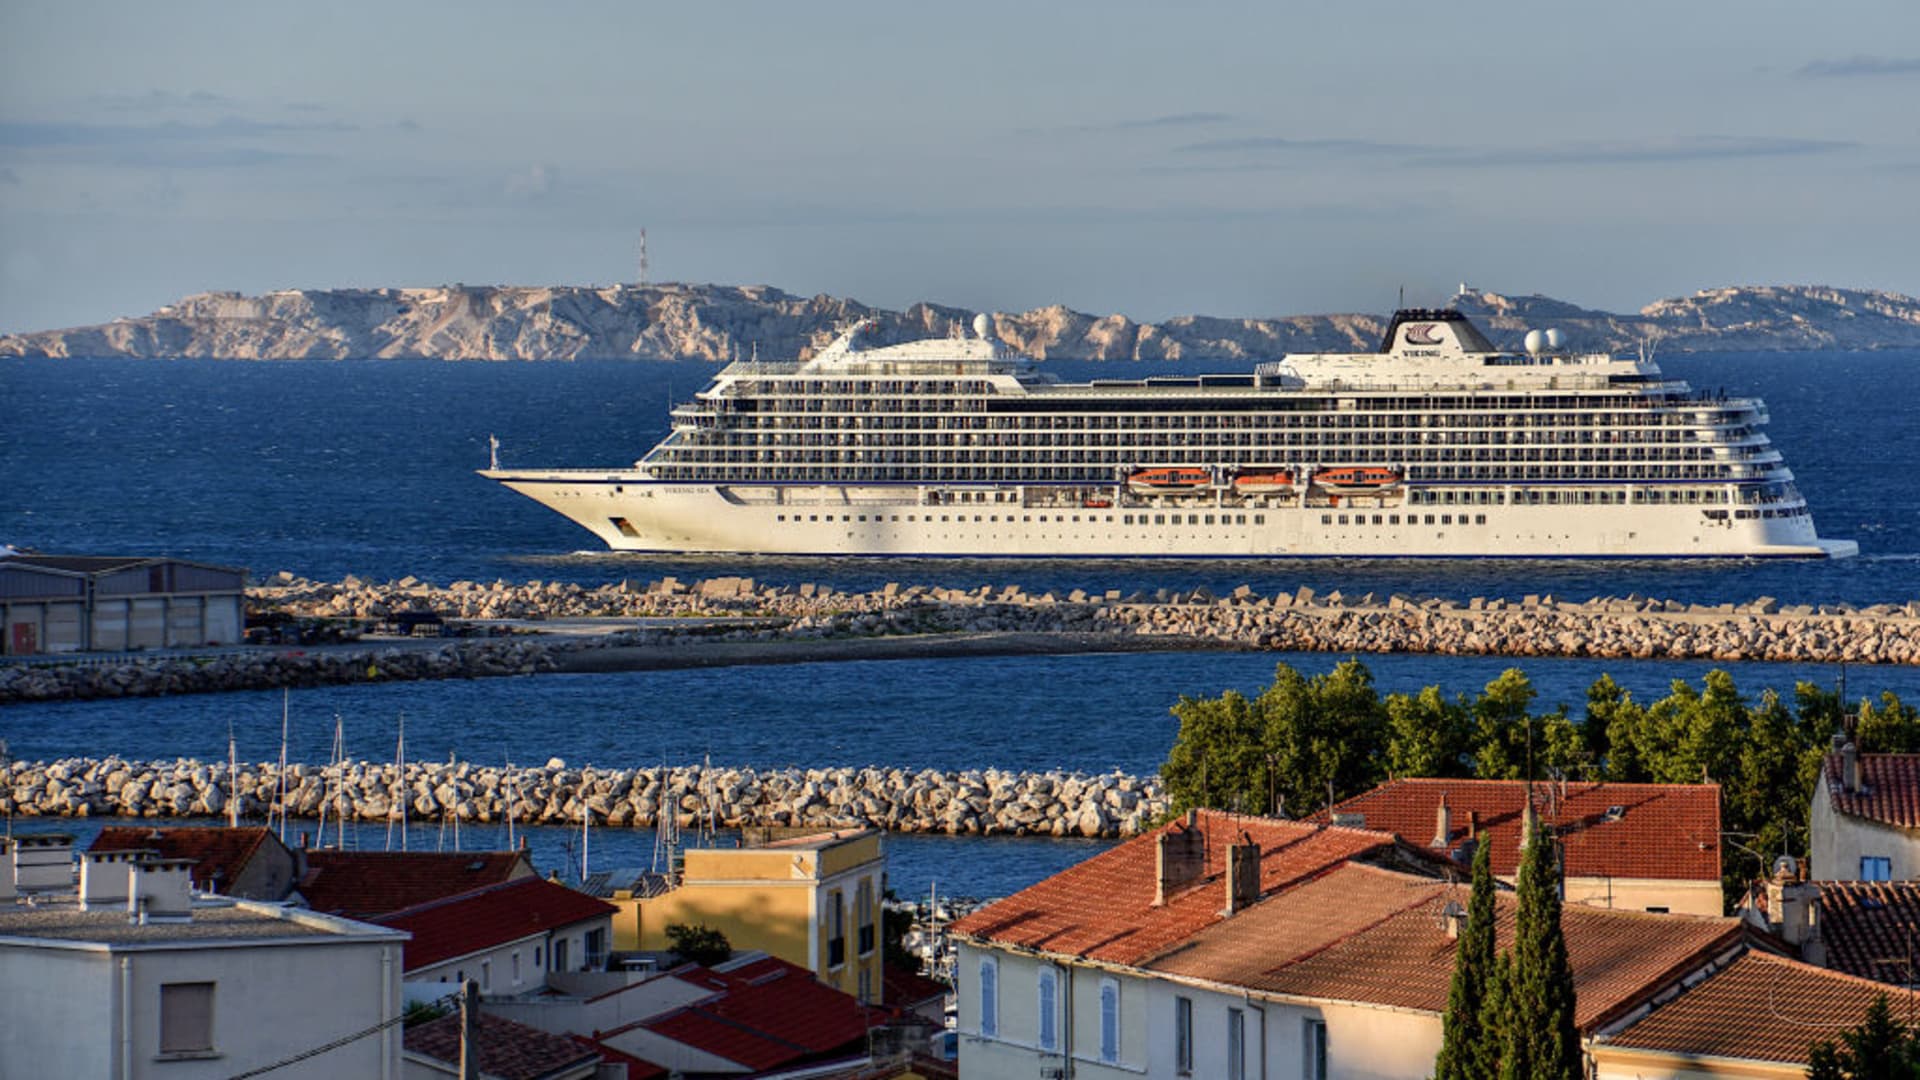 Possible Viking IPO is latest sign cruise industry is a good bet for investors, according to analyst. How to play it